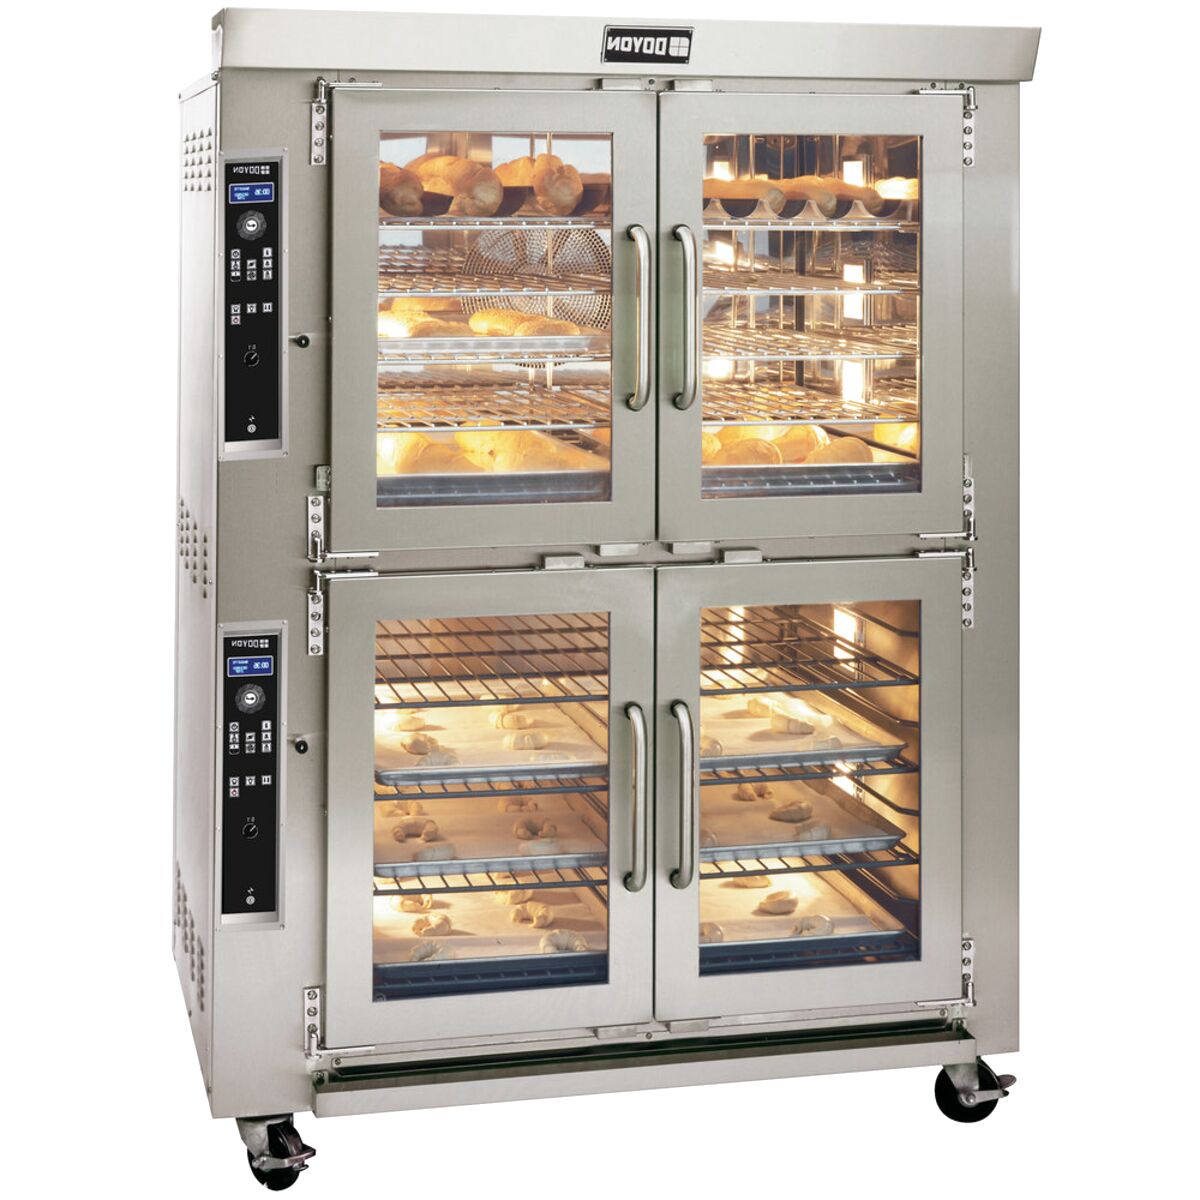 Used bakery machines for sale